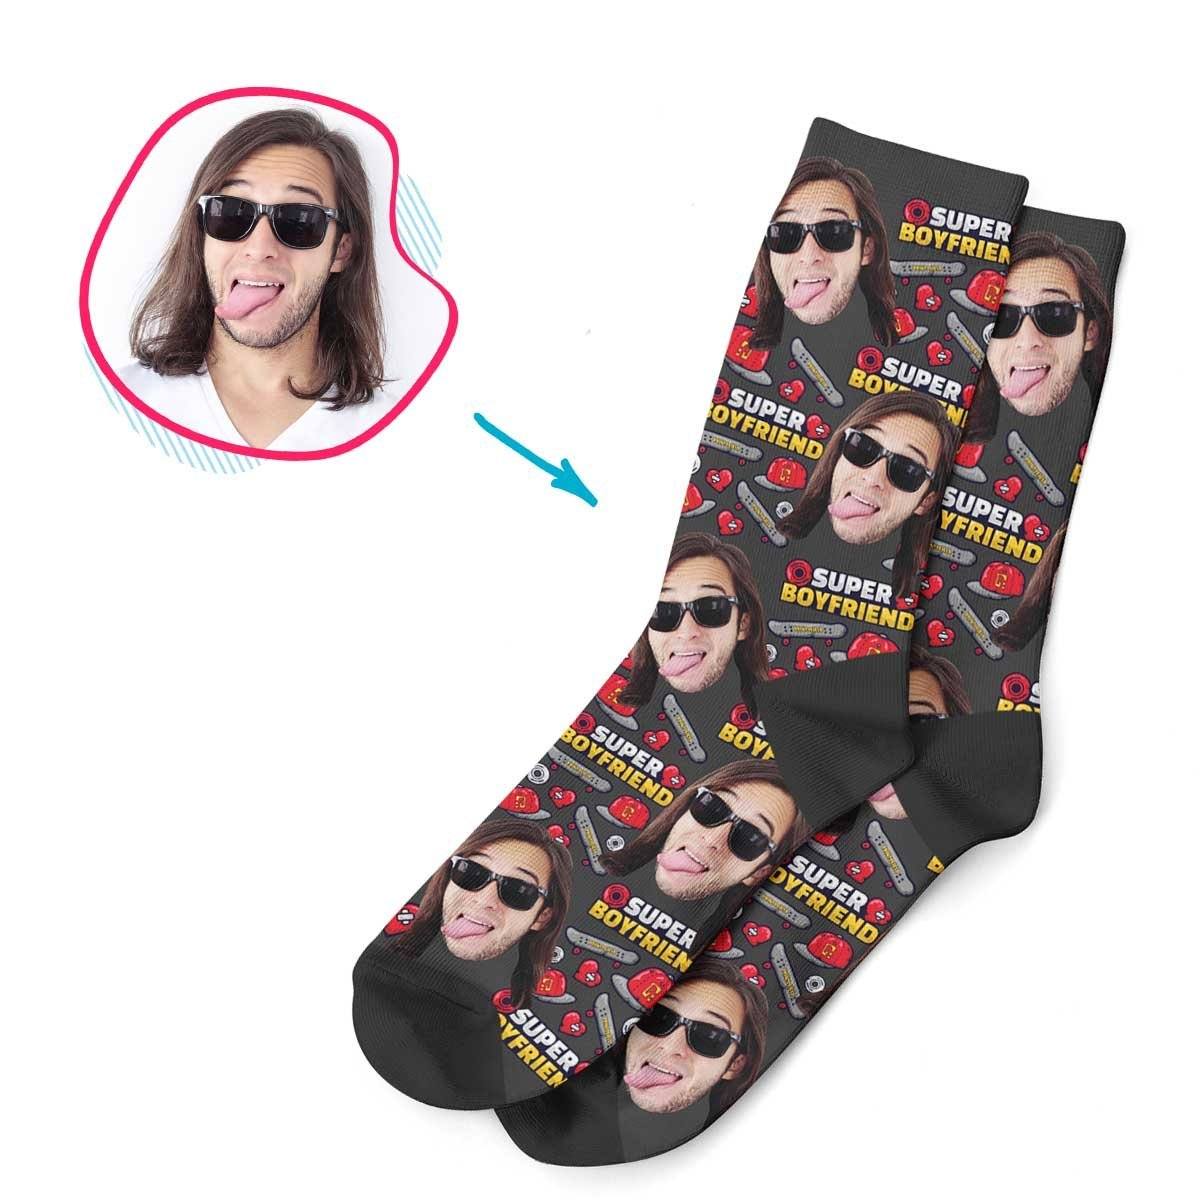 Dark Boyfriend personalized socks with photo of face printed on them